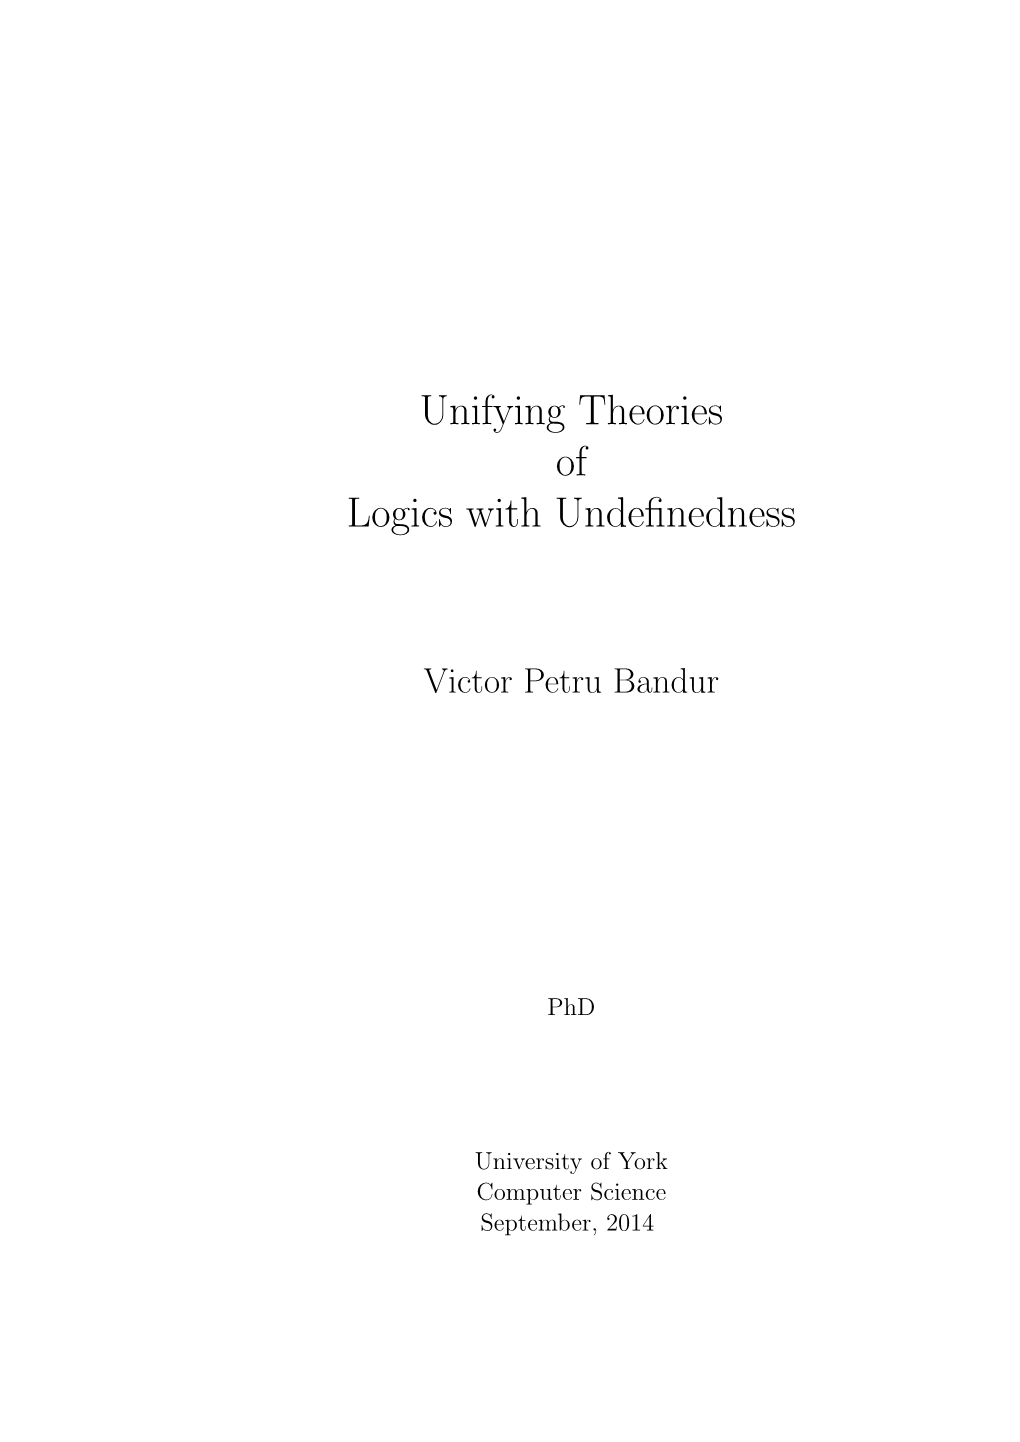 Unifying Theories of Logics with Undefinedness